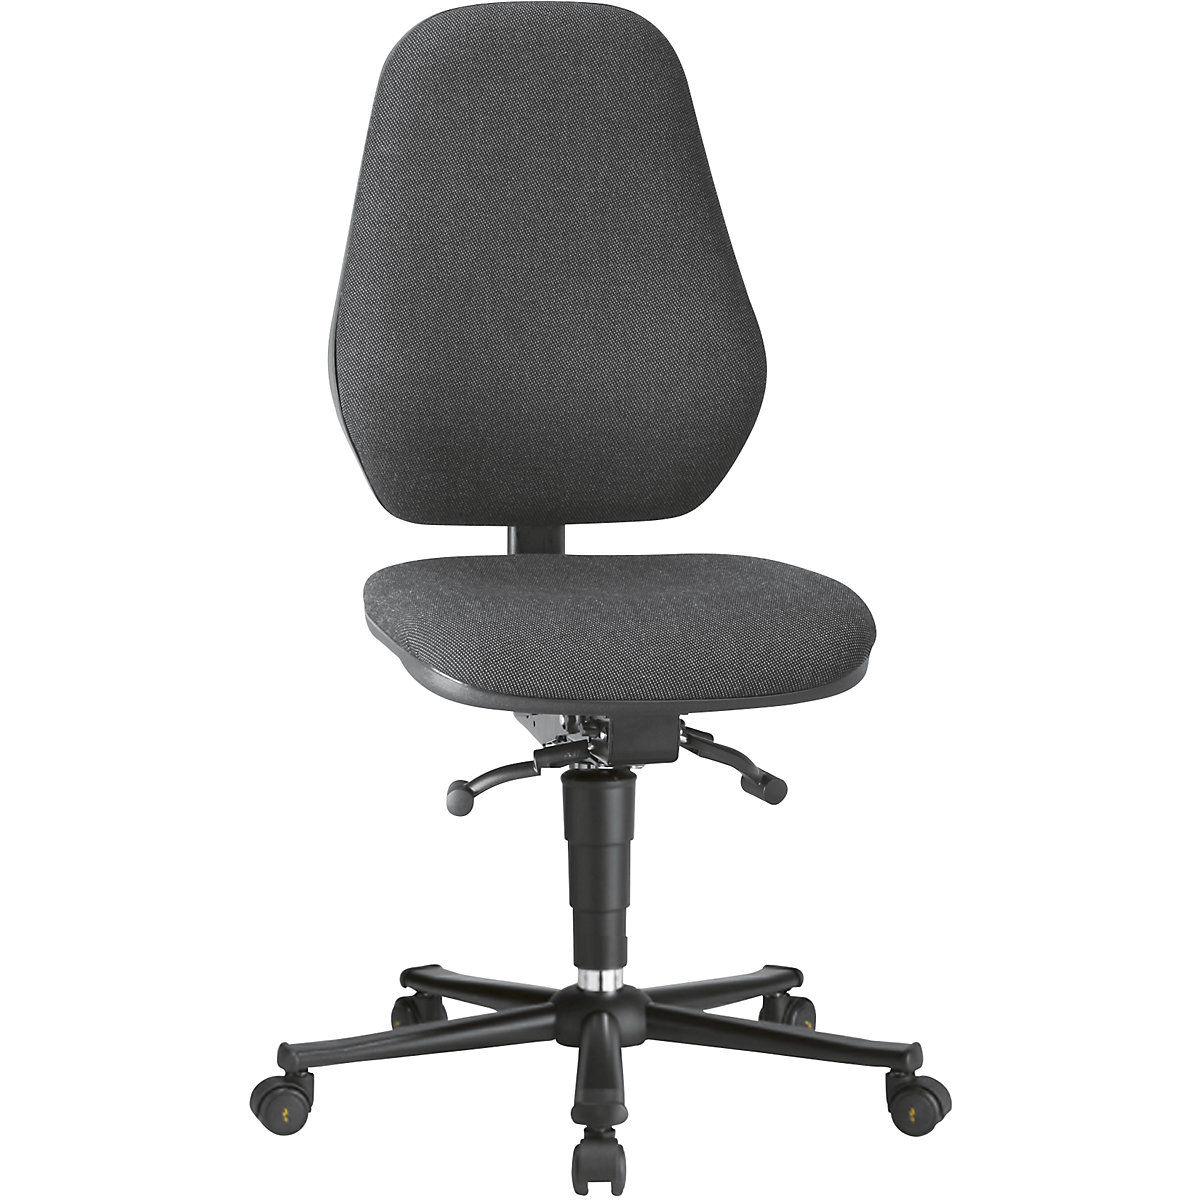 Industrial swivel chair – bimos, with ESD protection, with synchronous mechanism and weight adjustment, with castors, black fabric covering-13